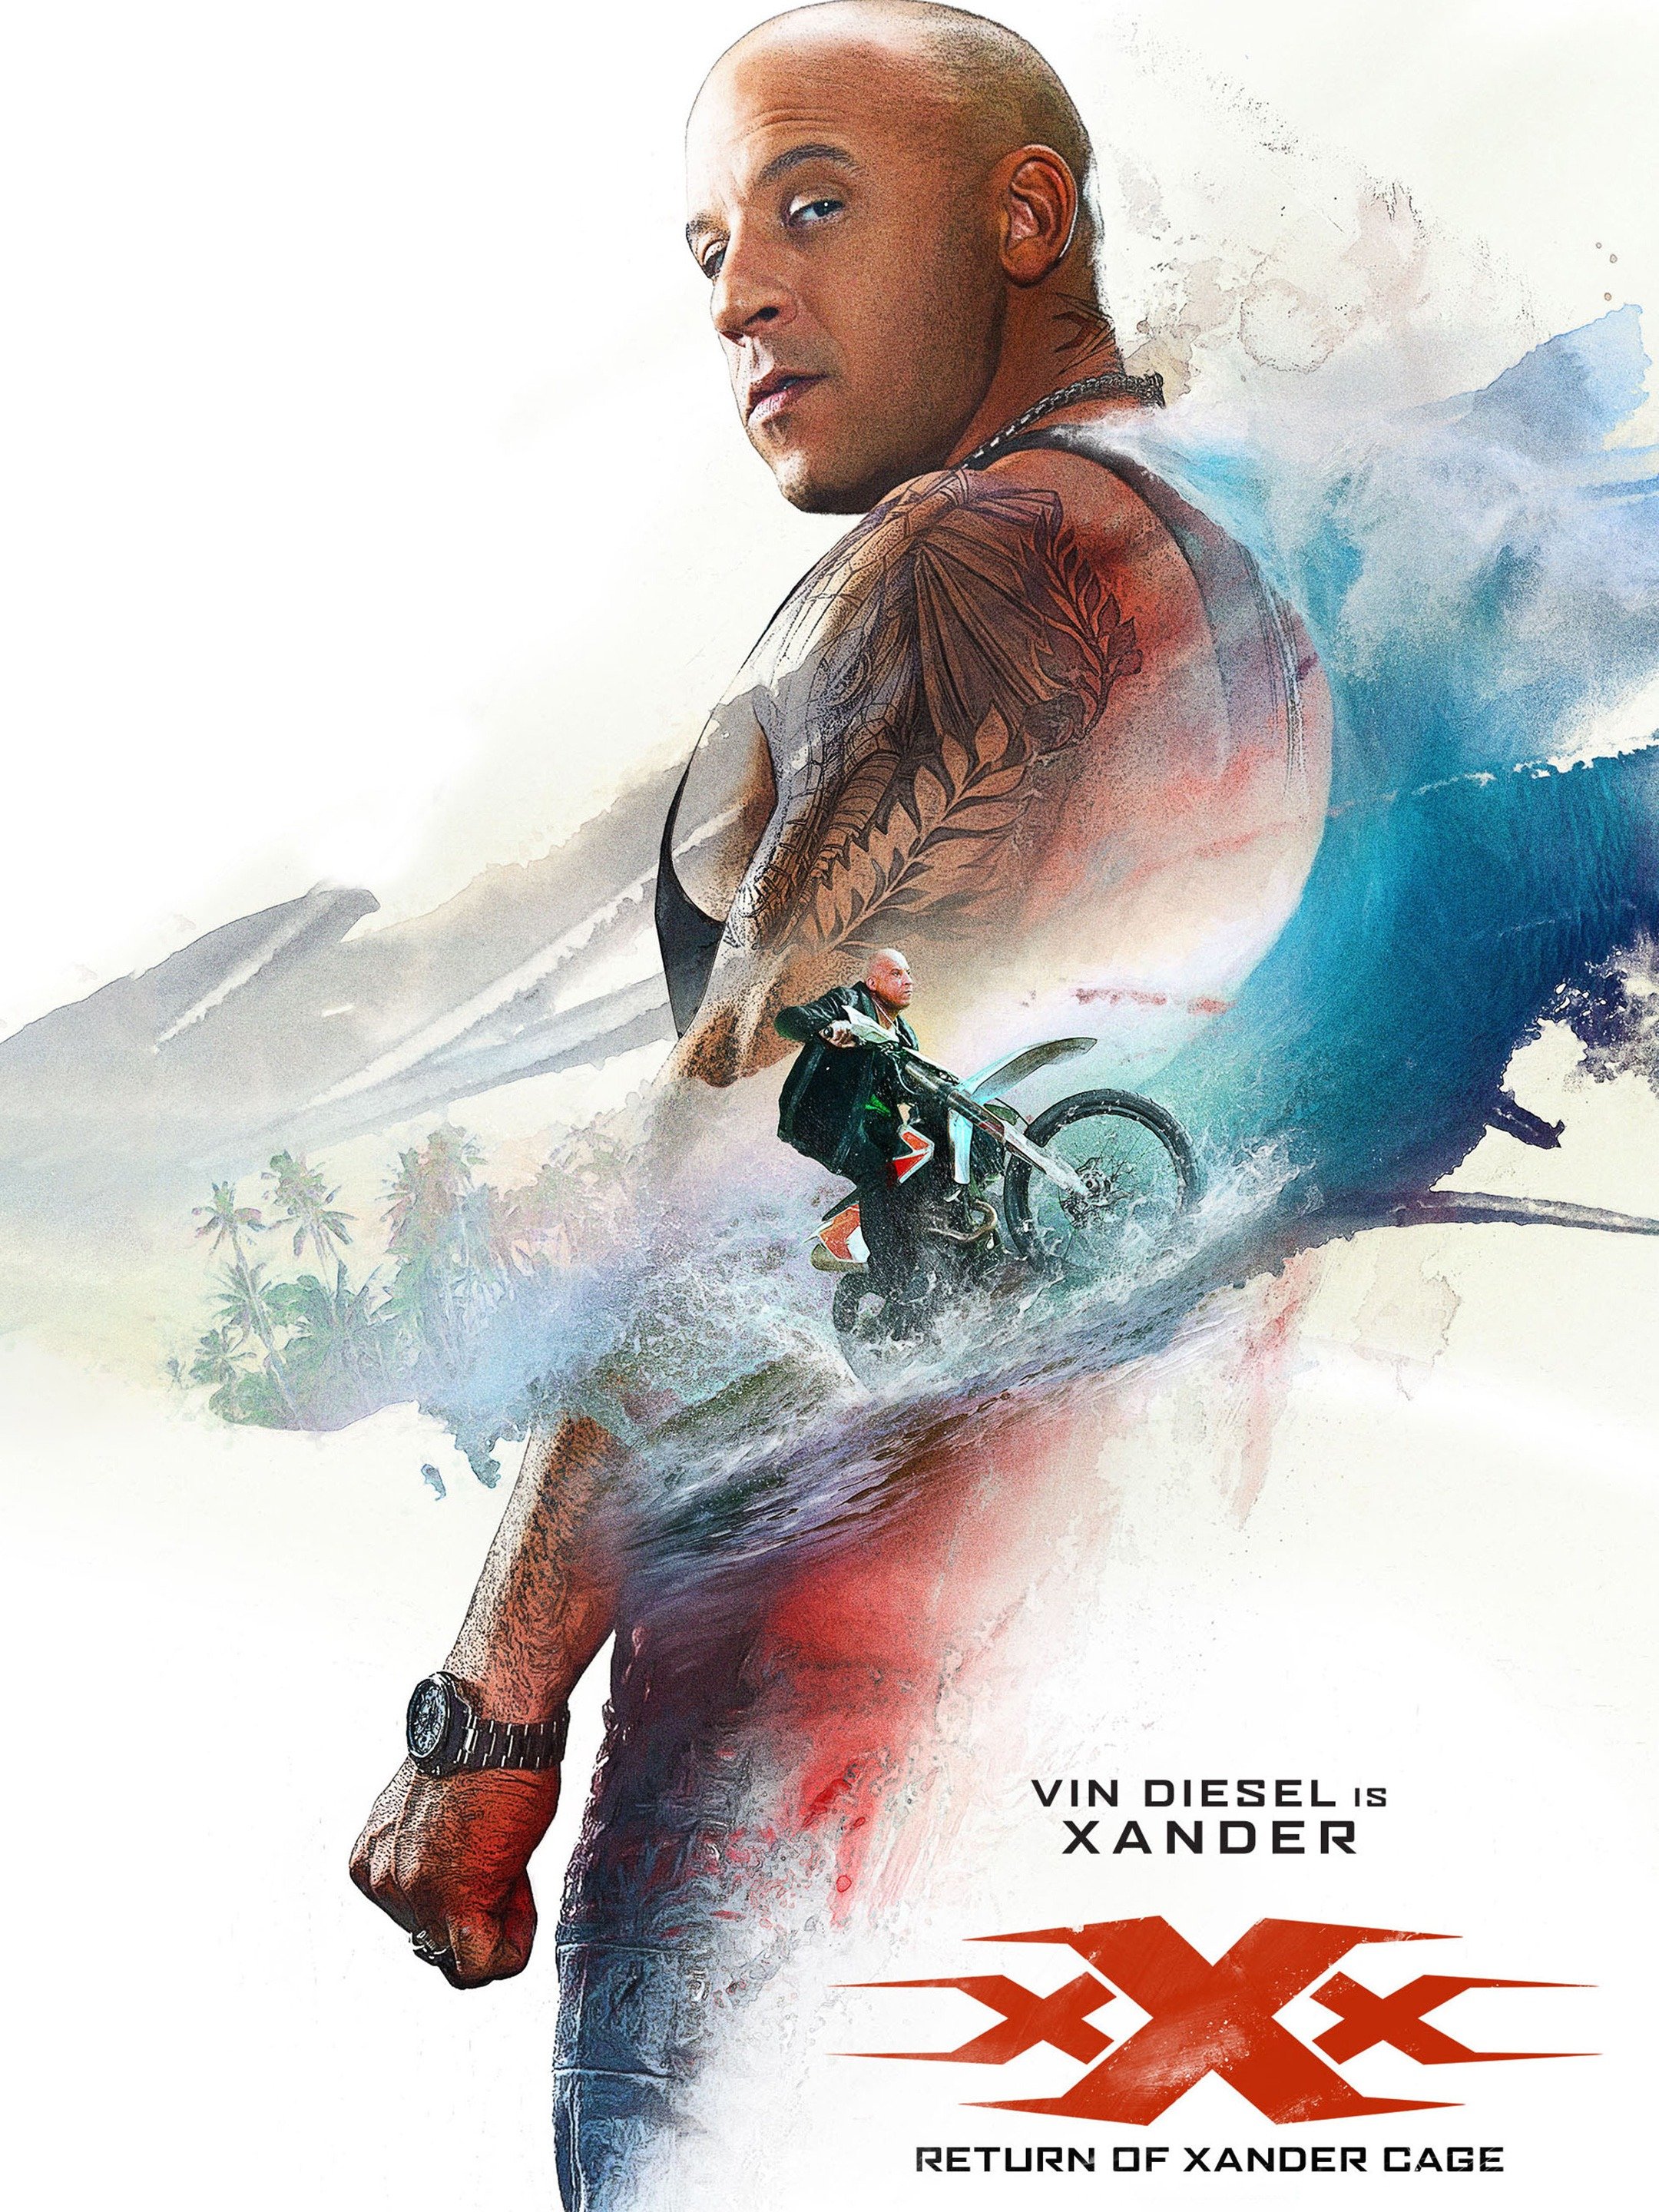 xXx: Return of Xander Cage - Rotten Tomatoes